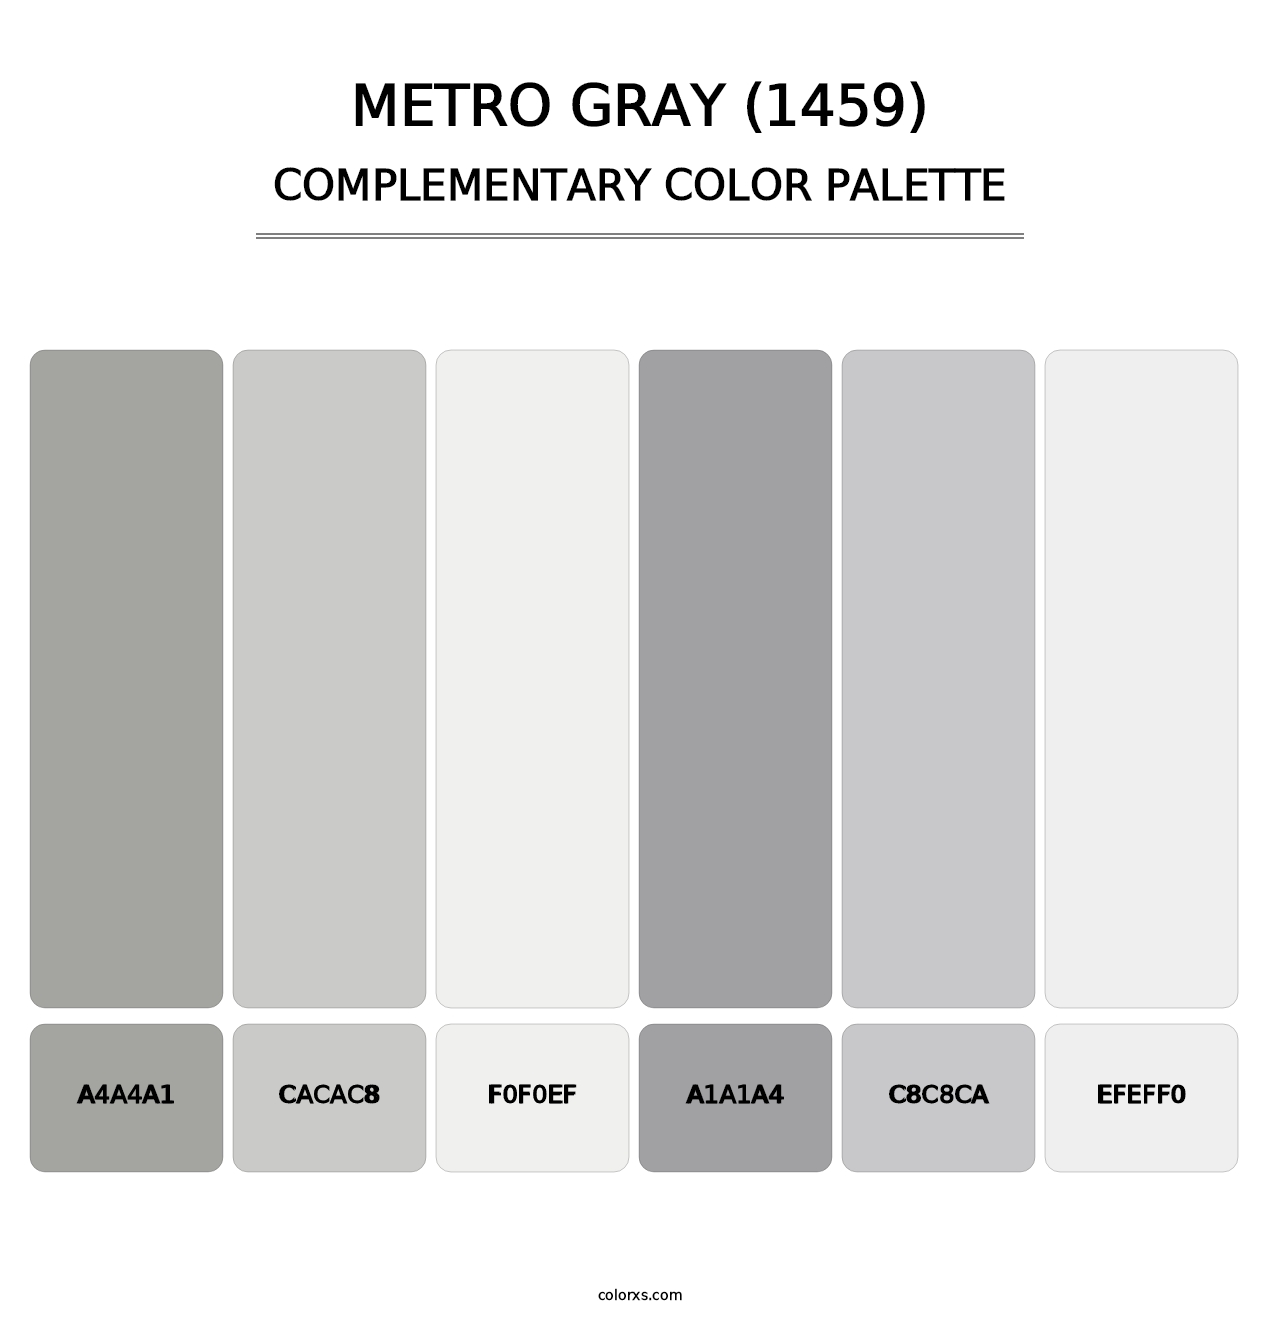 Metro Gray (1459) - Complementary Color Palette